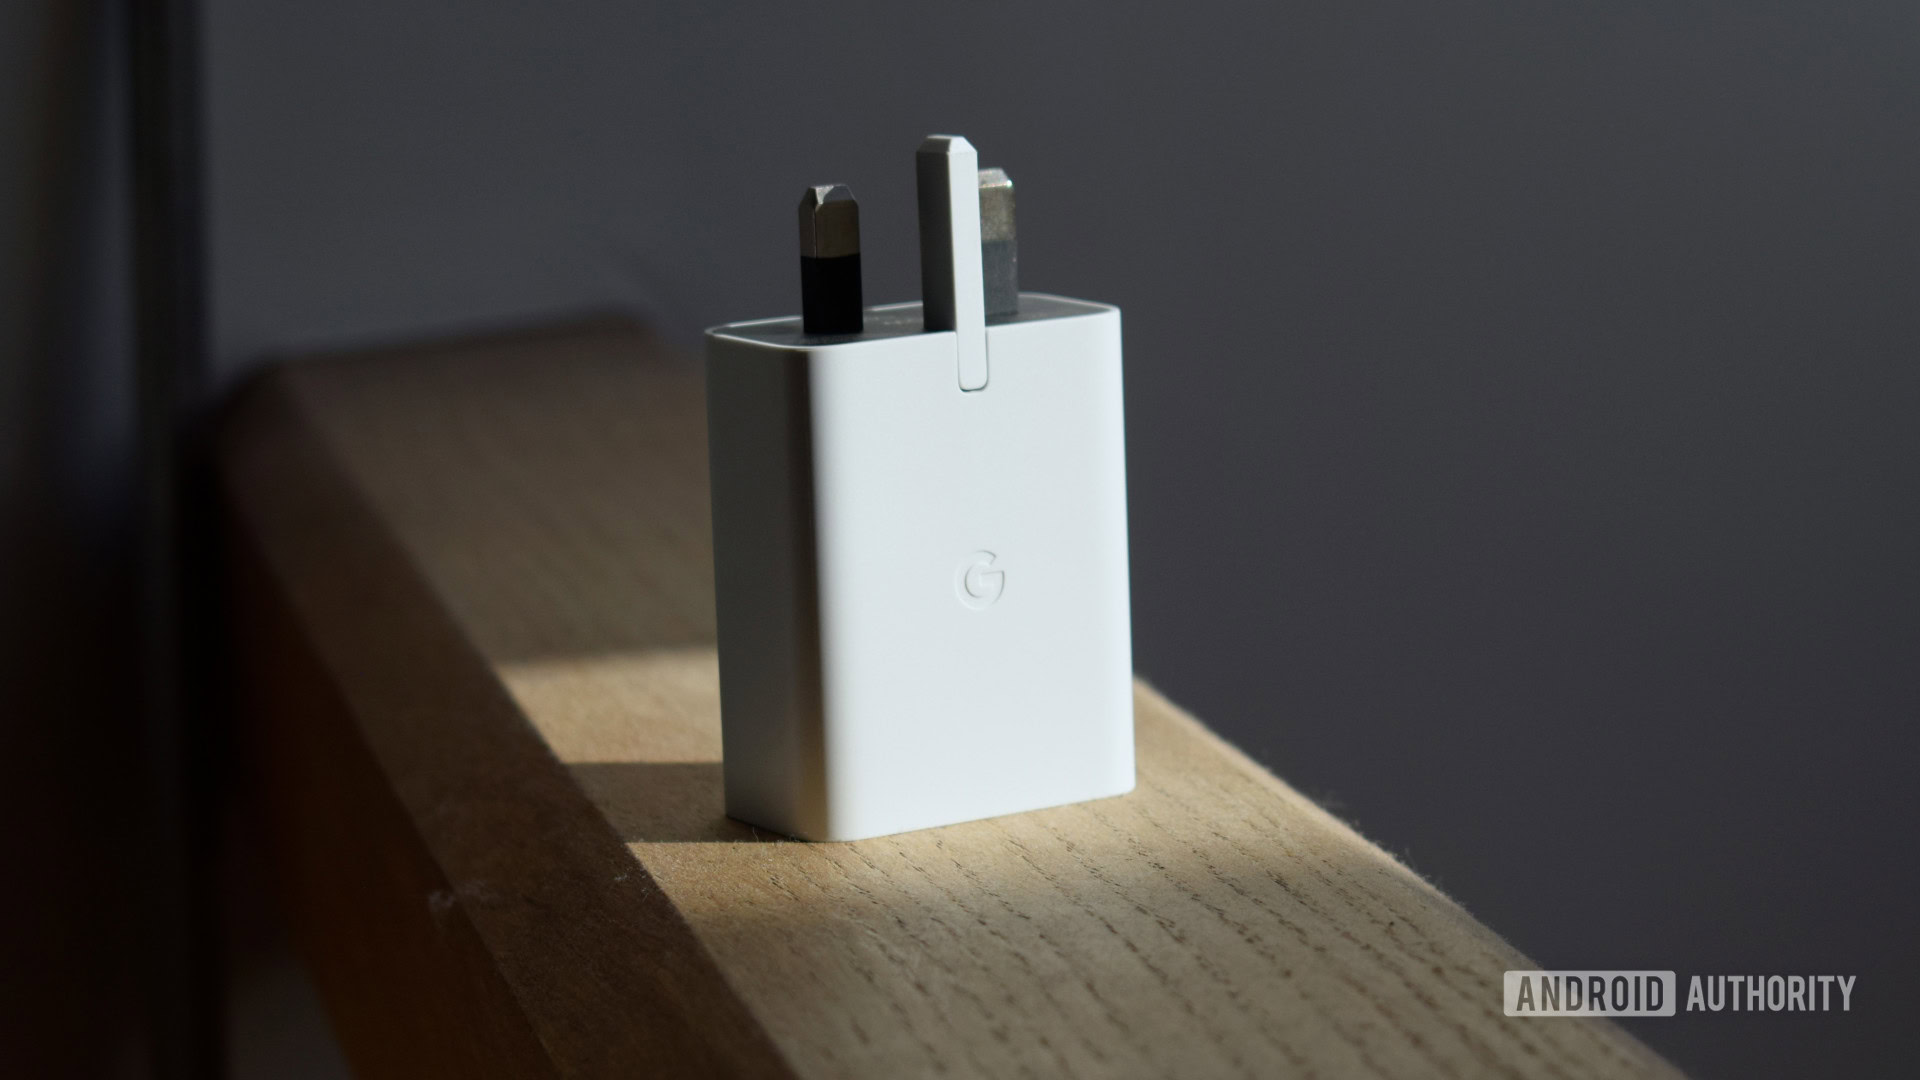 Google 30W USB-C power adapter standing upright on a wooden beam